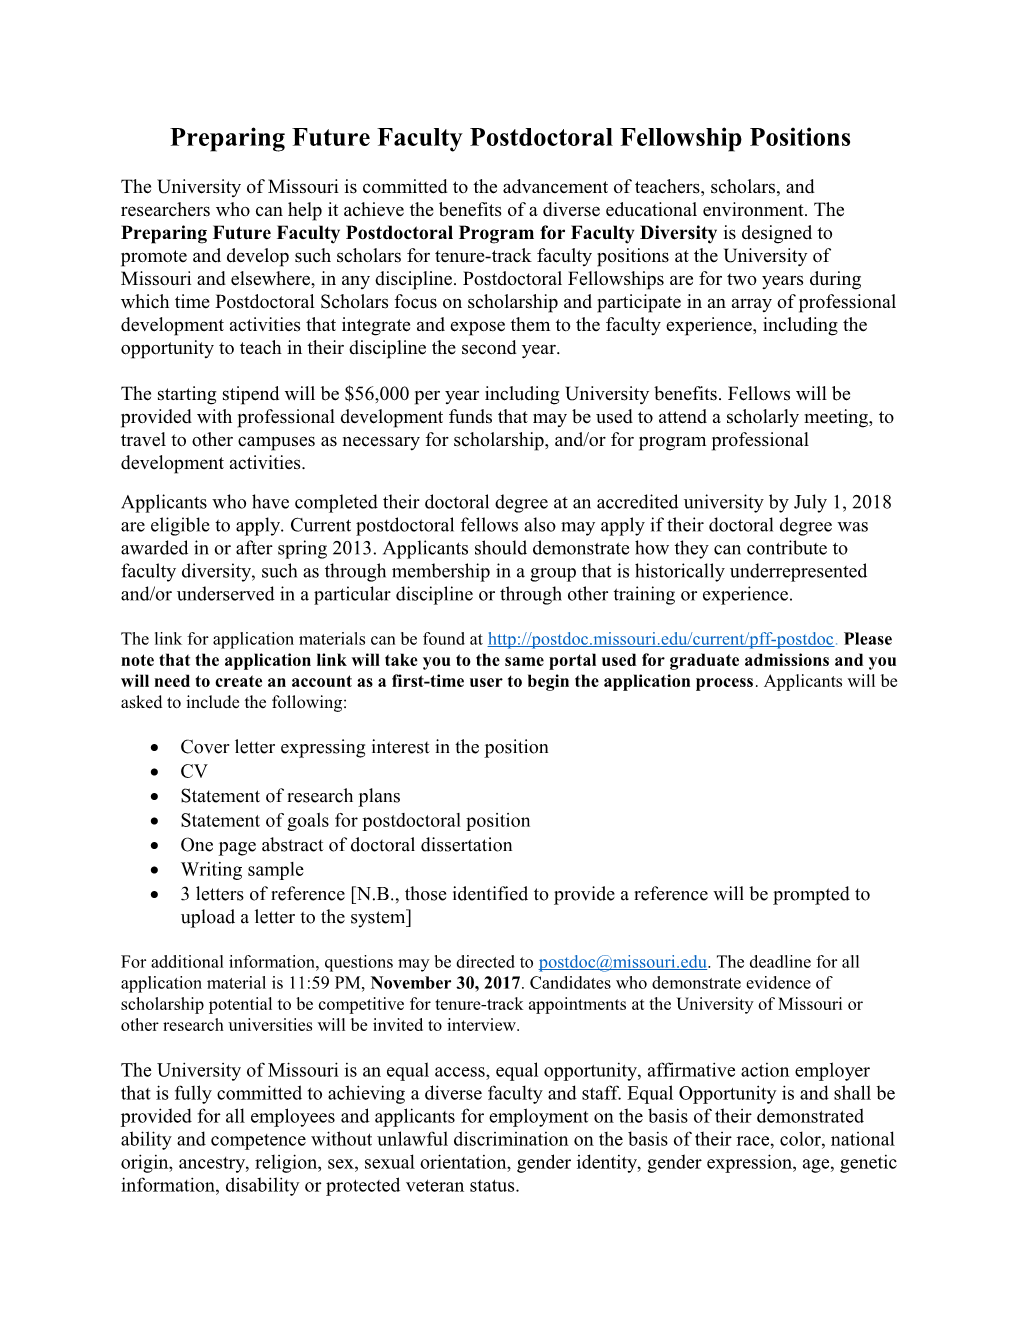 Preparing Future Faculty Postdoctoral Fellowship Positions